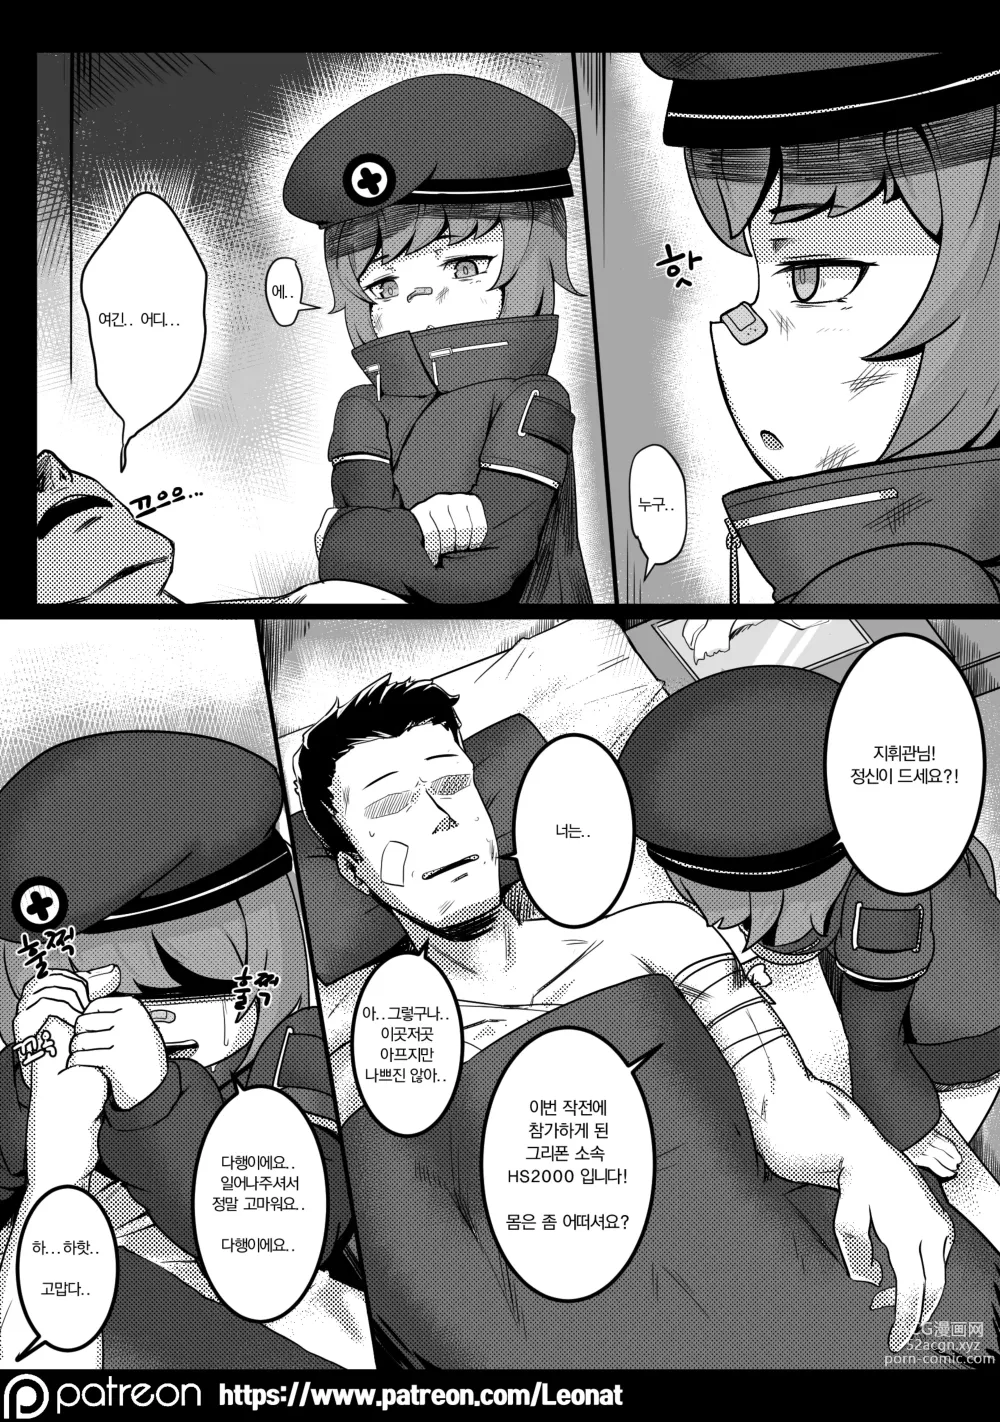 Page 6 of doujinshi Another Frontline 1 - Underground Medical Support (decensored)